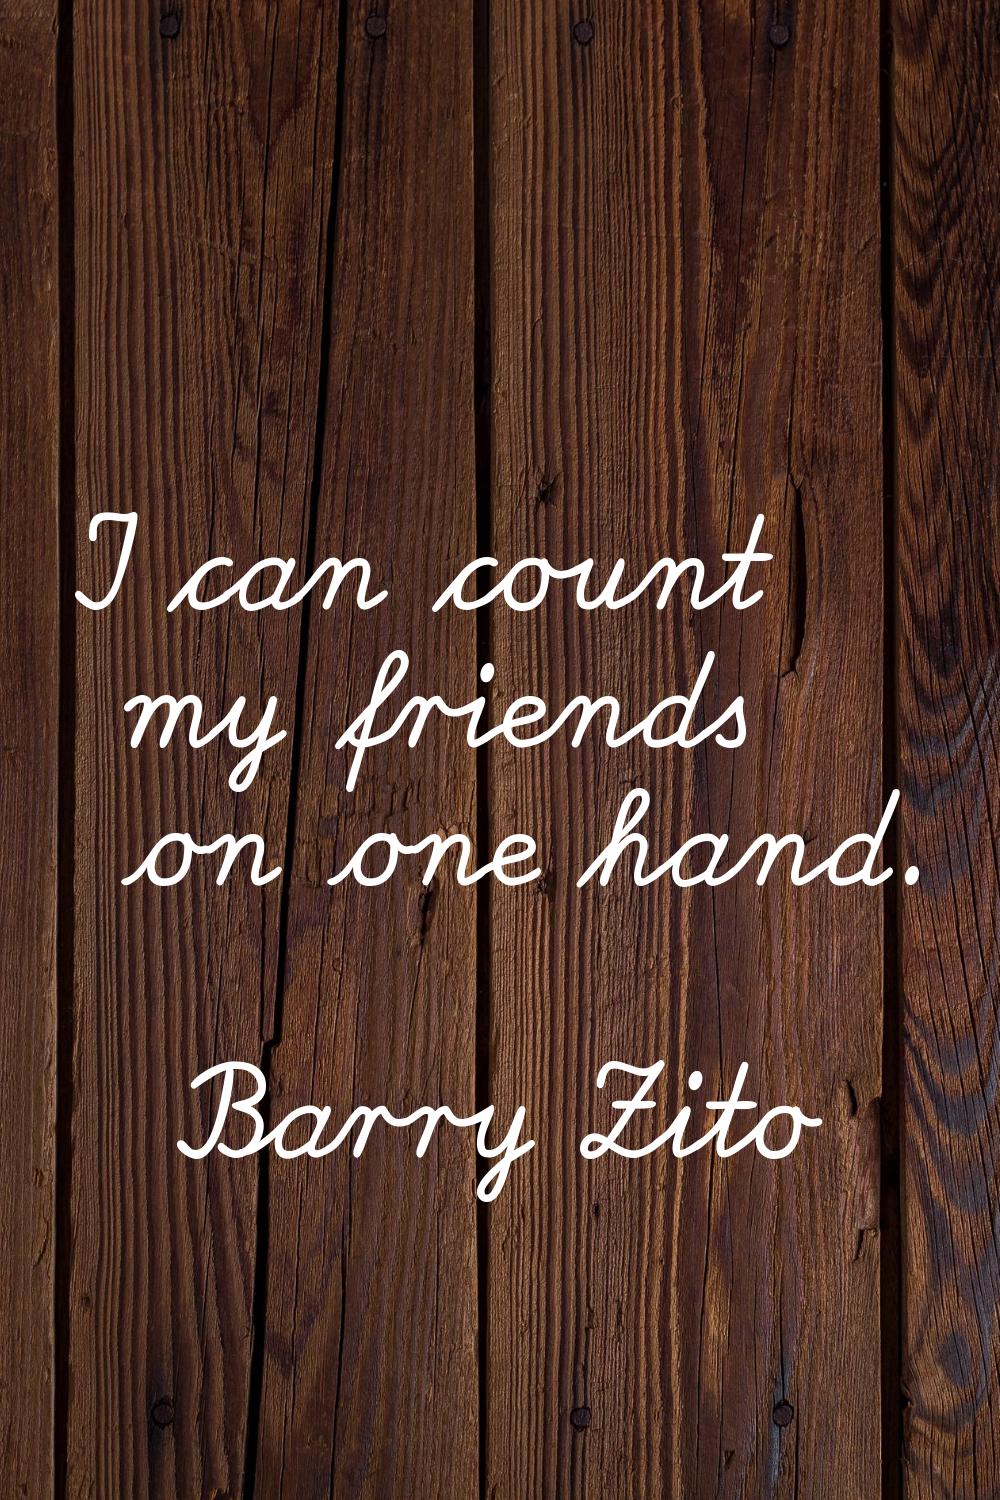 I can count my friends on one hand.